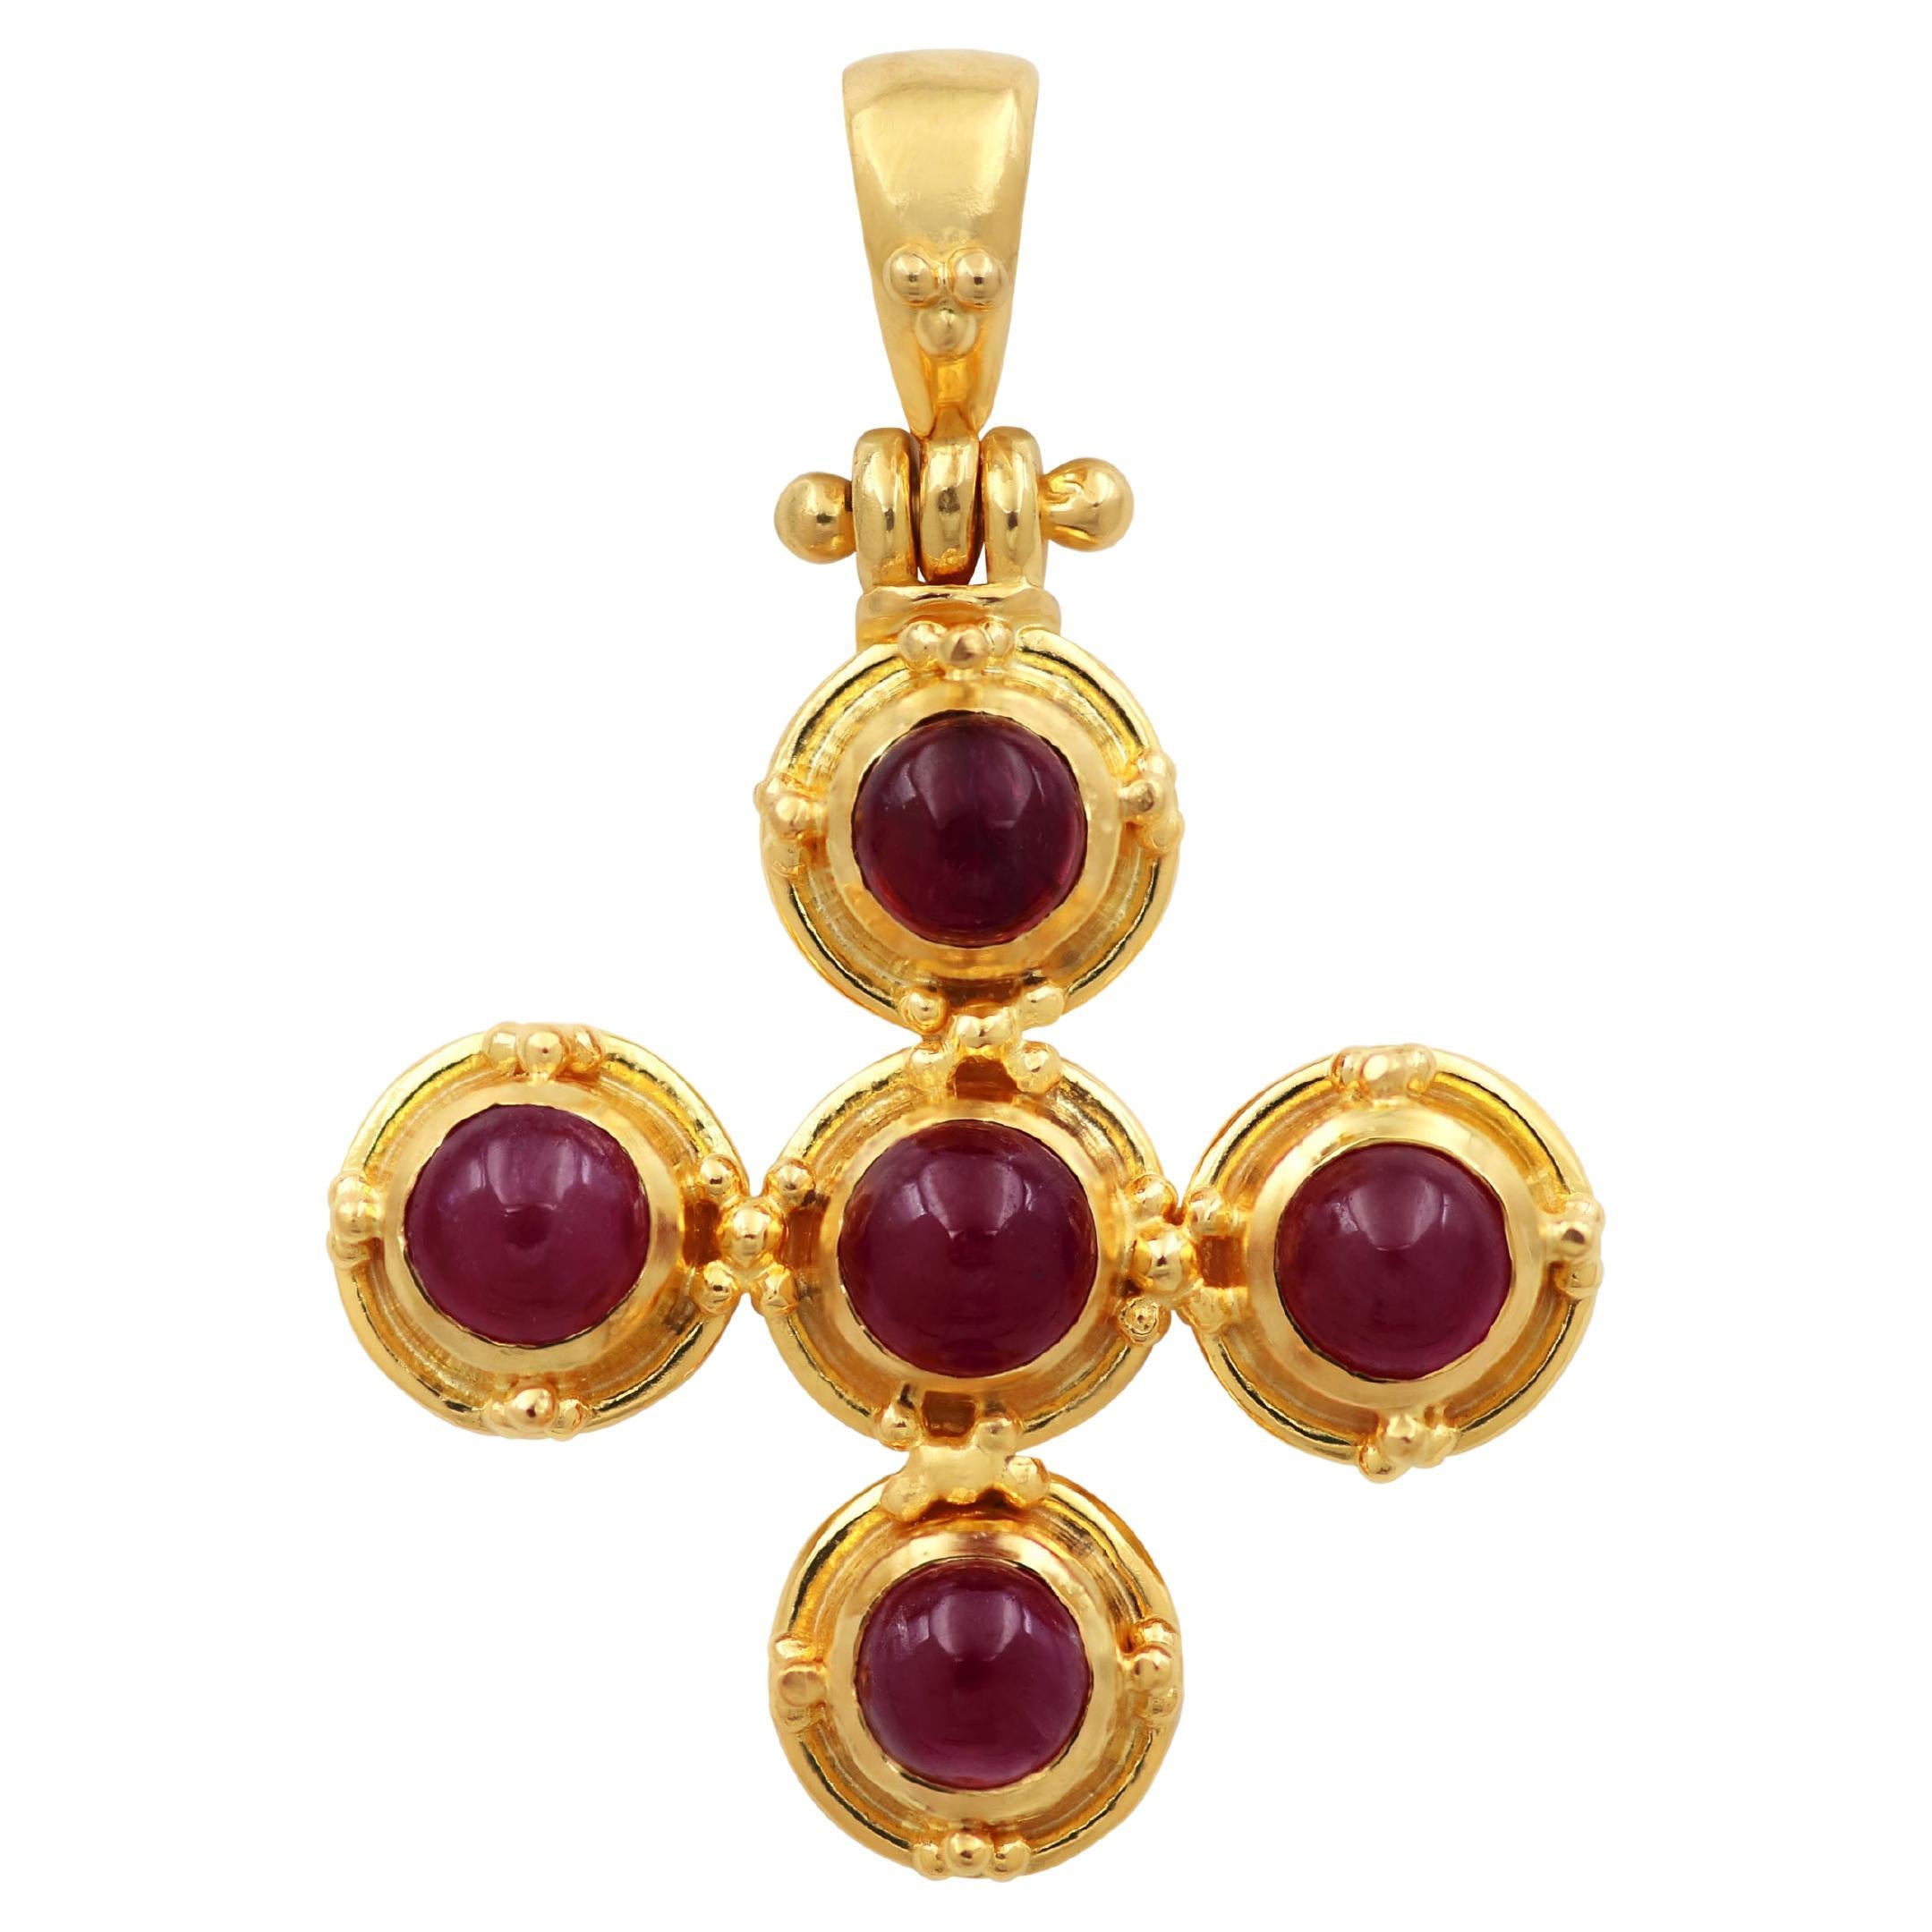 Dimos 18k Gold Classic Cross with Rubies and Granulation